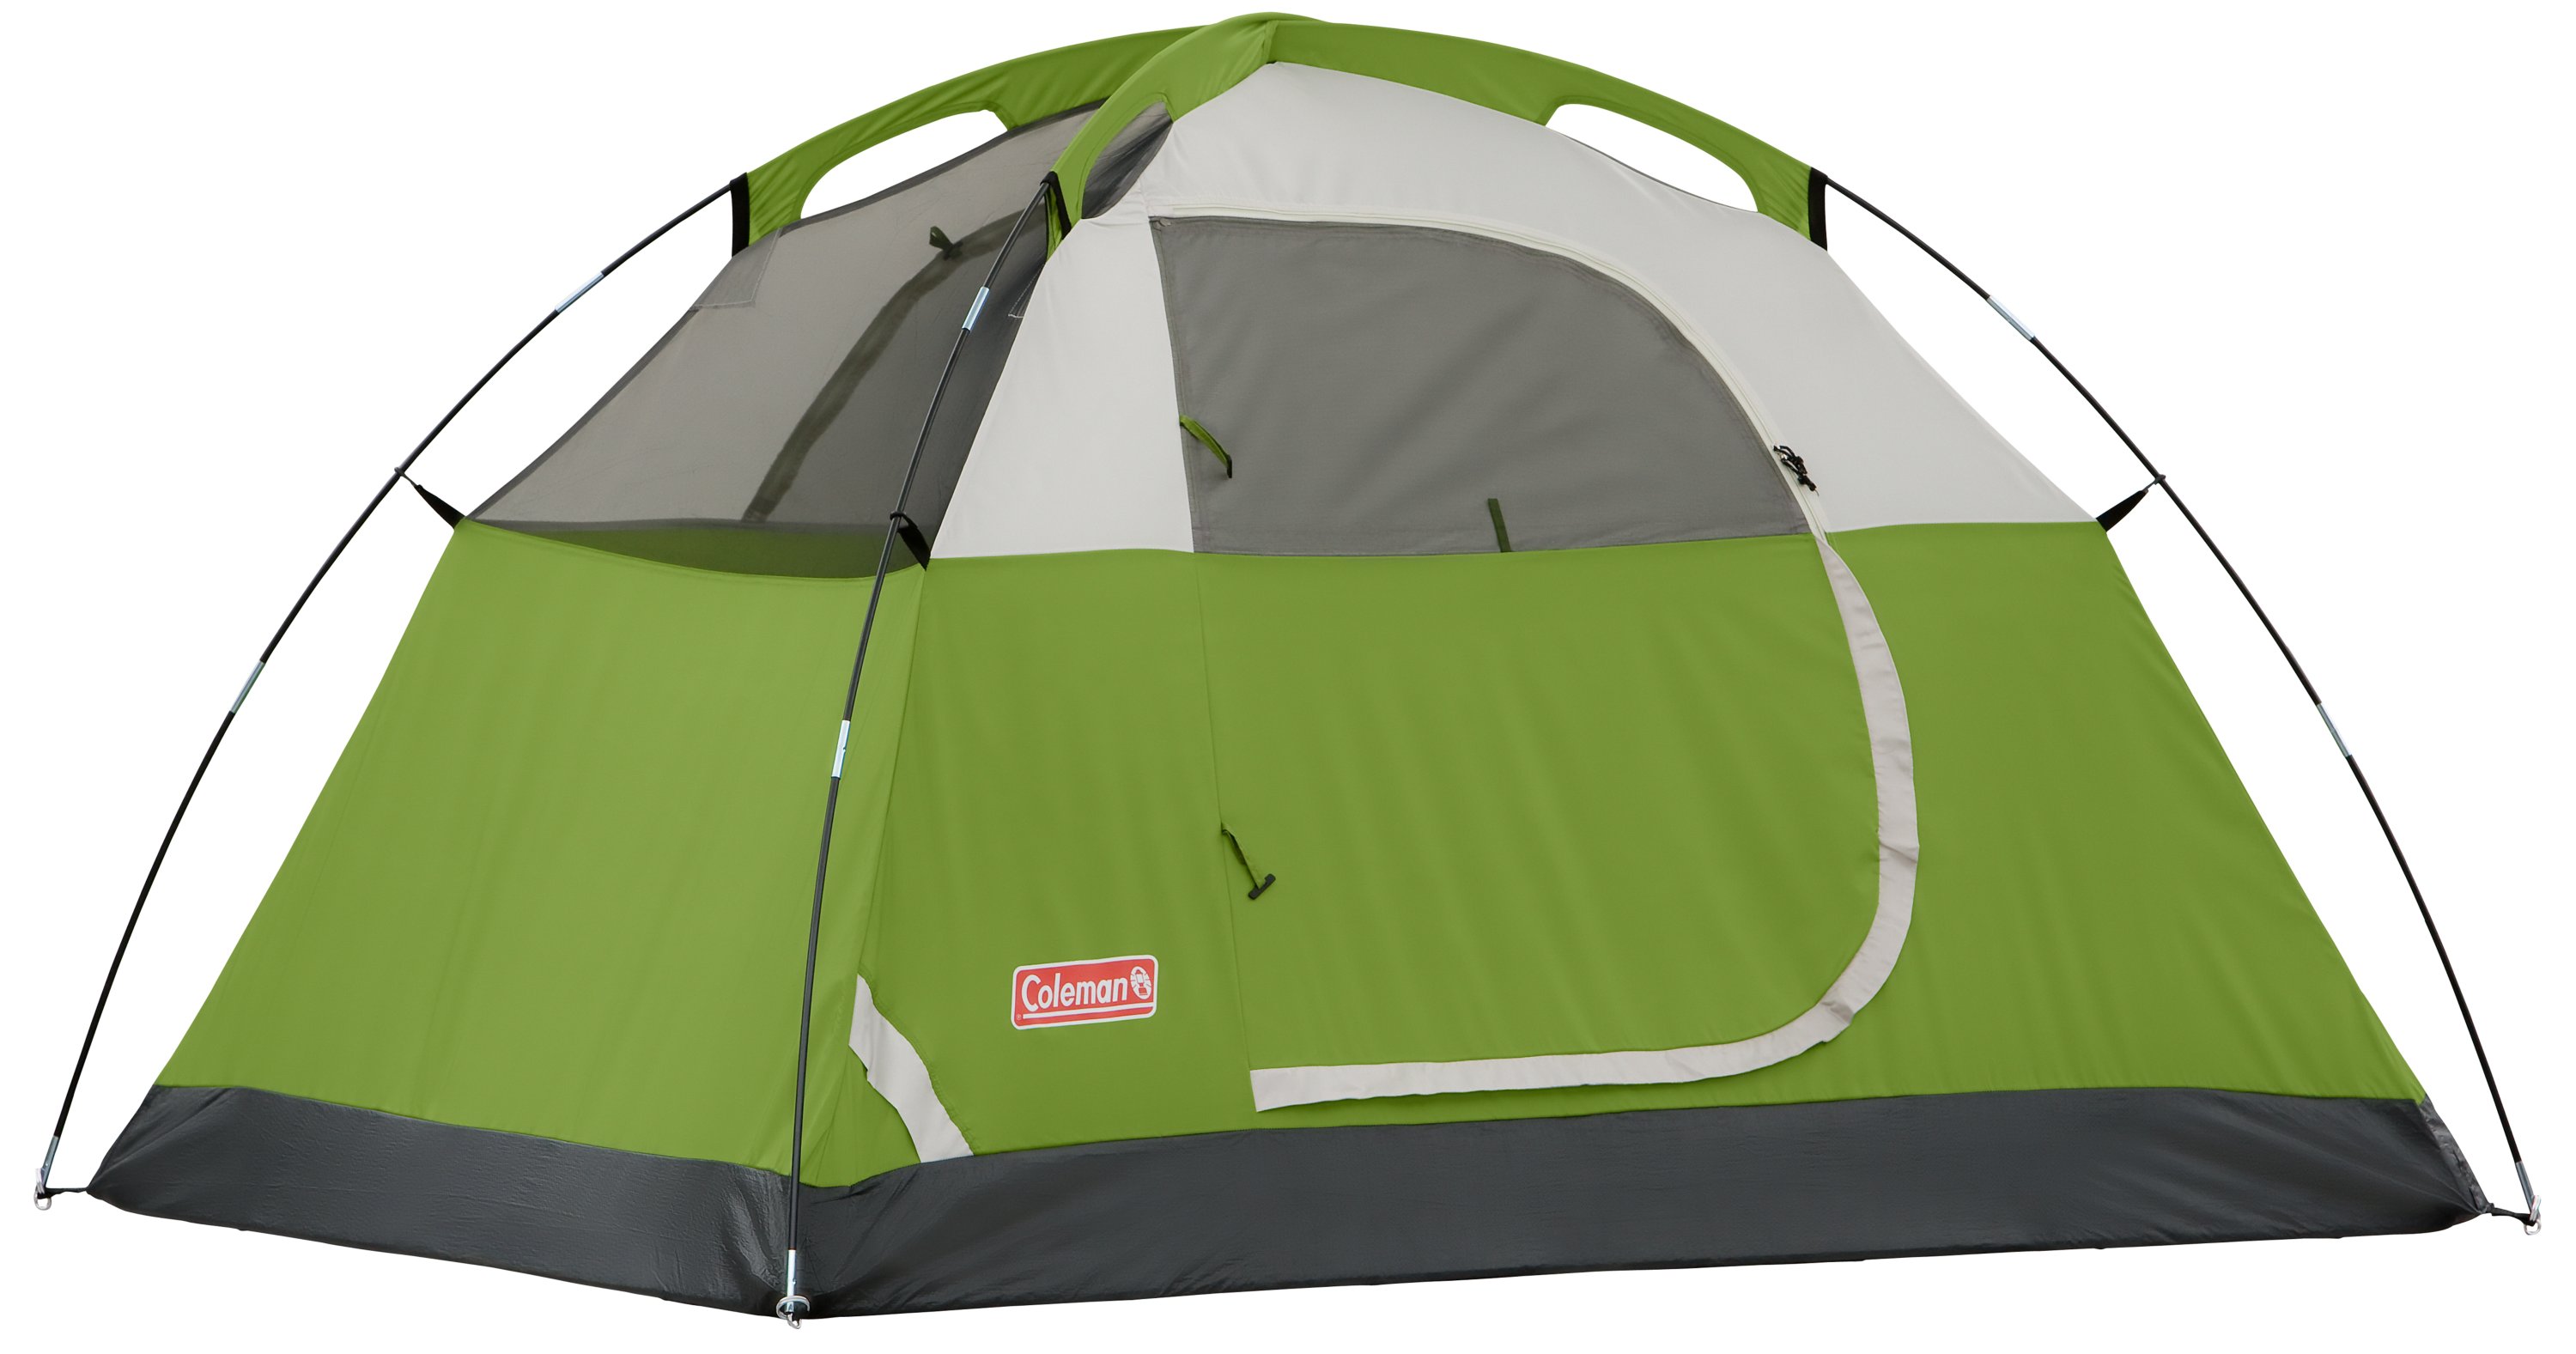 Sundome® 6-Person Camping Tent | Coleman